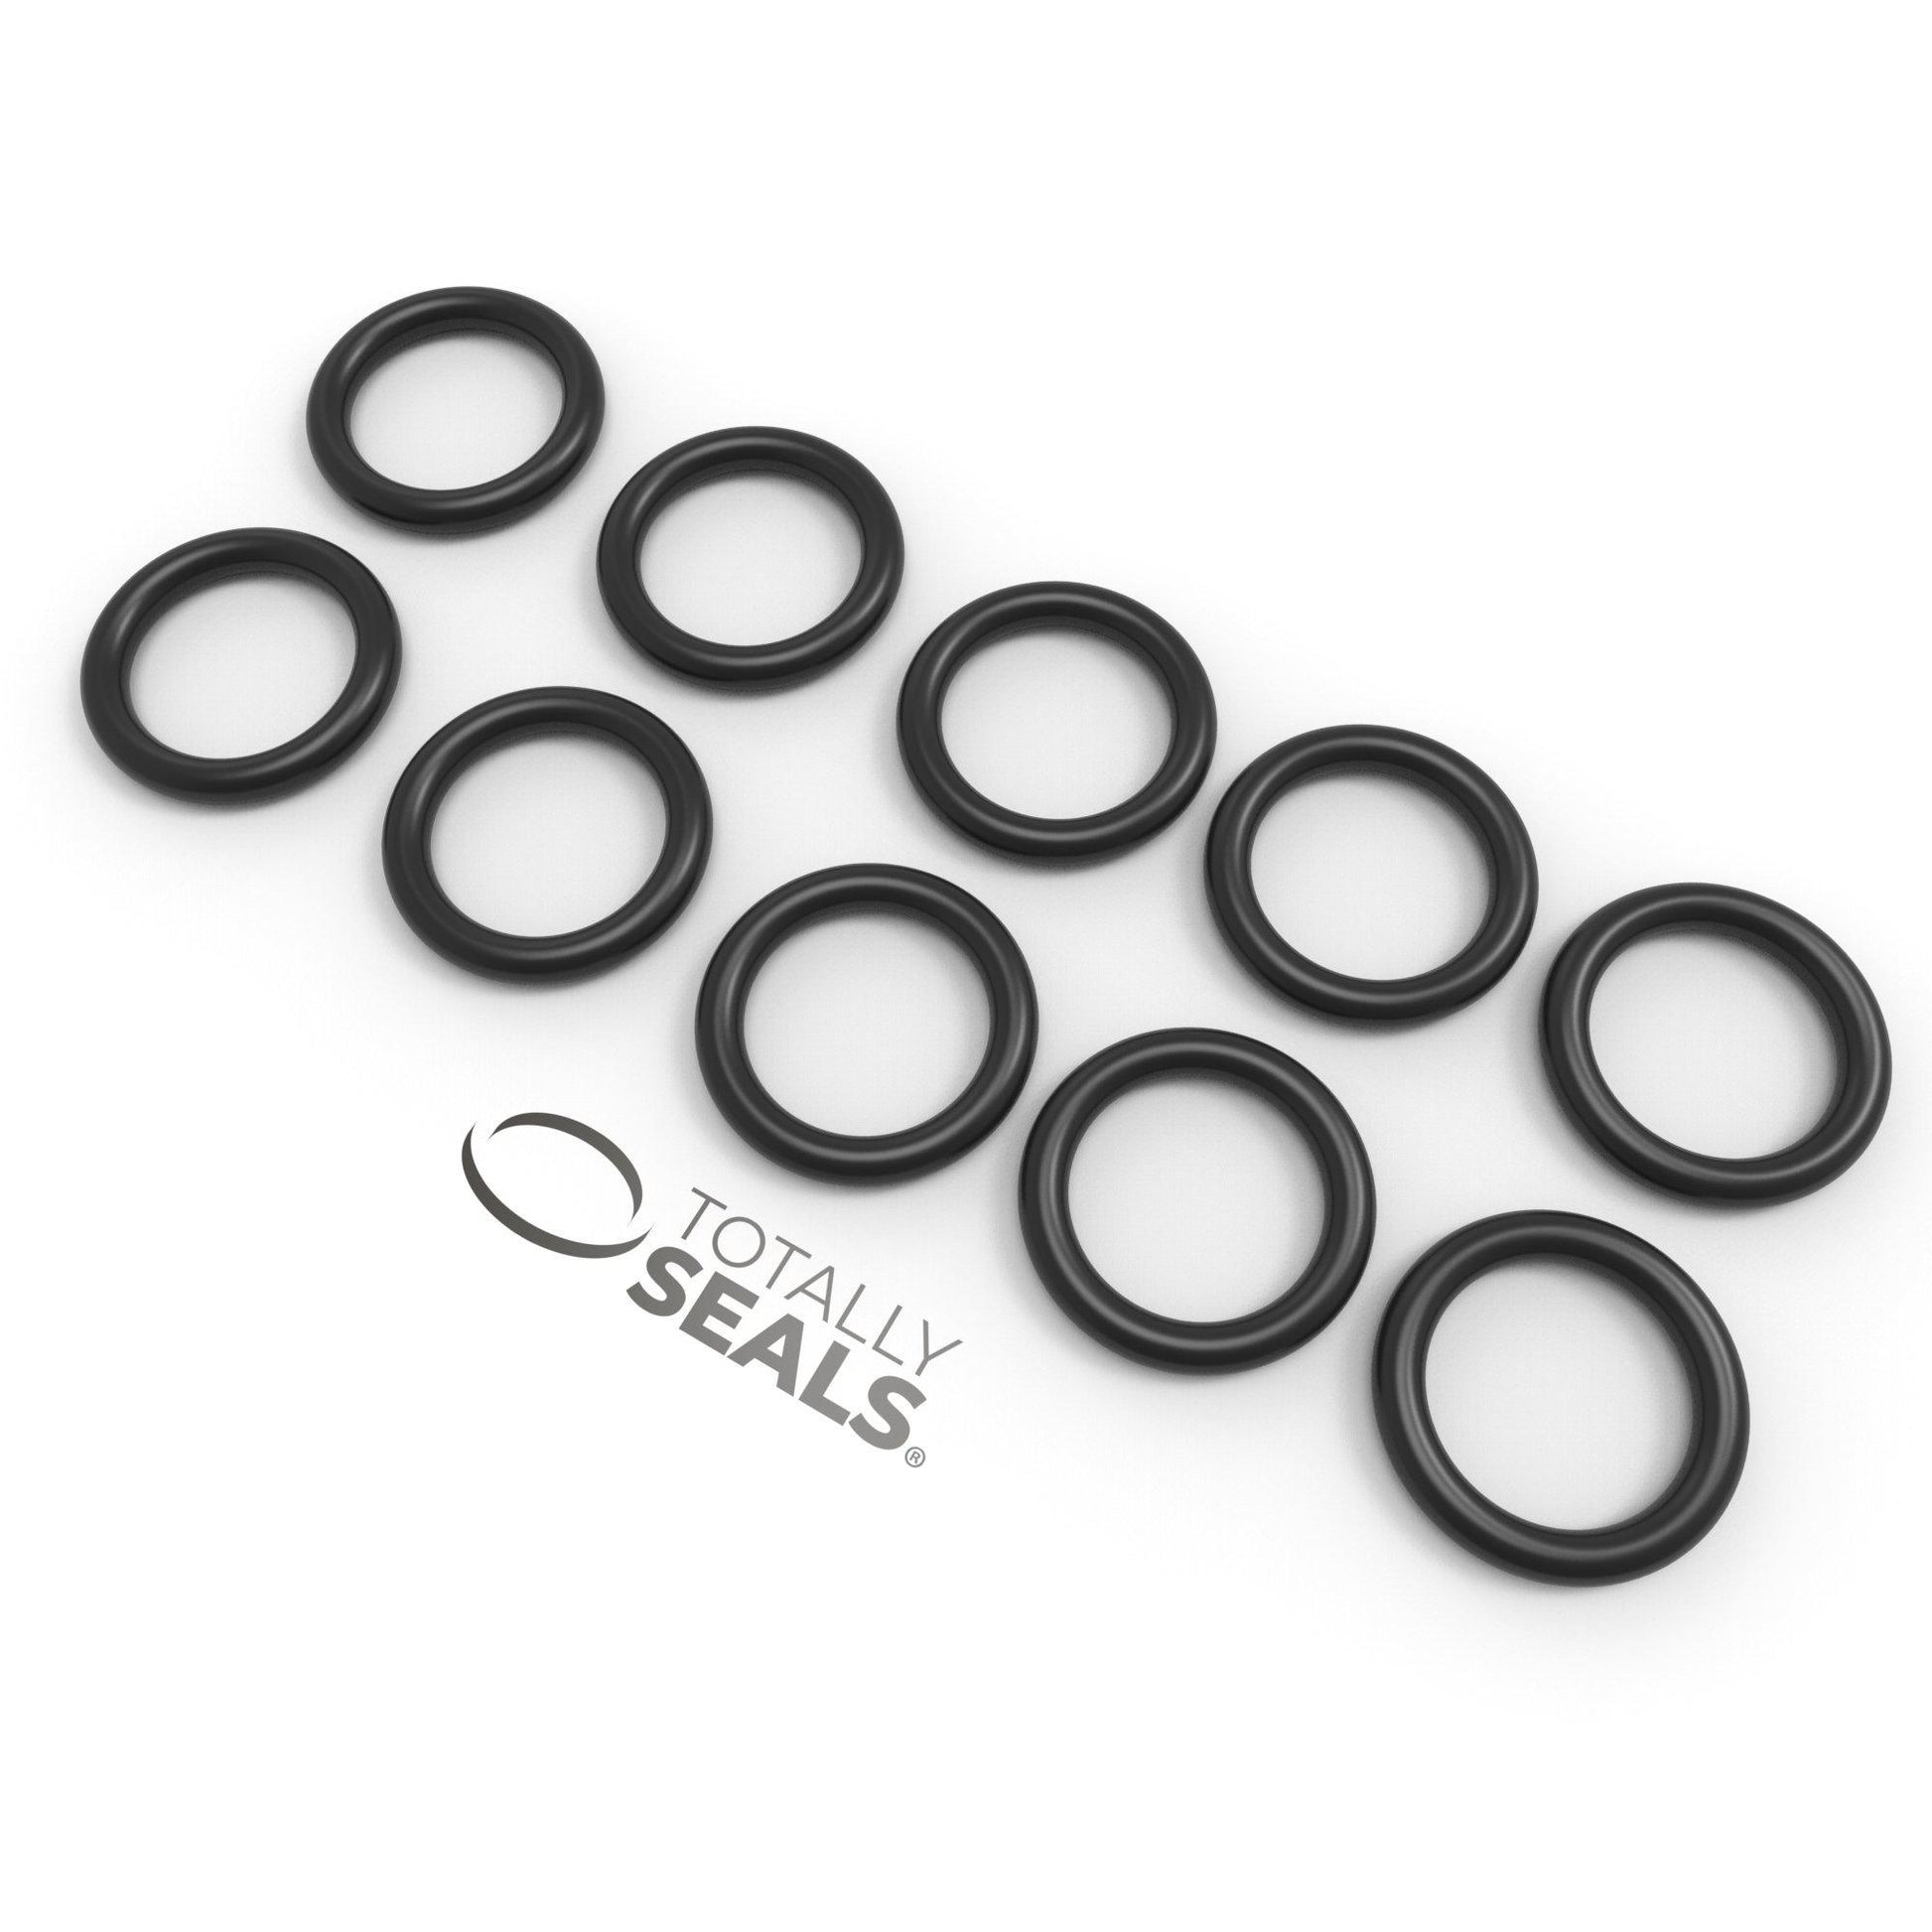 27mm x 1.5mm (30mm OD) Nitrile O-Rings - Totally Seals®